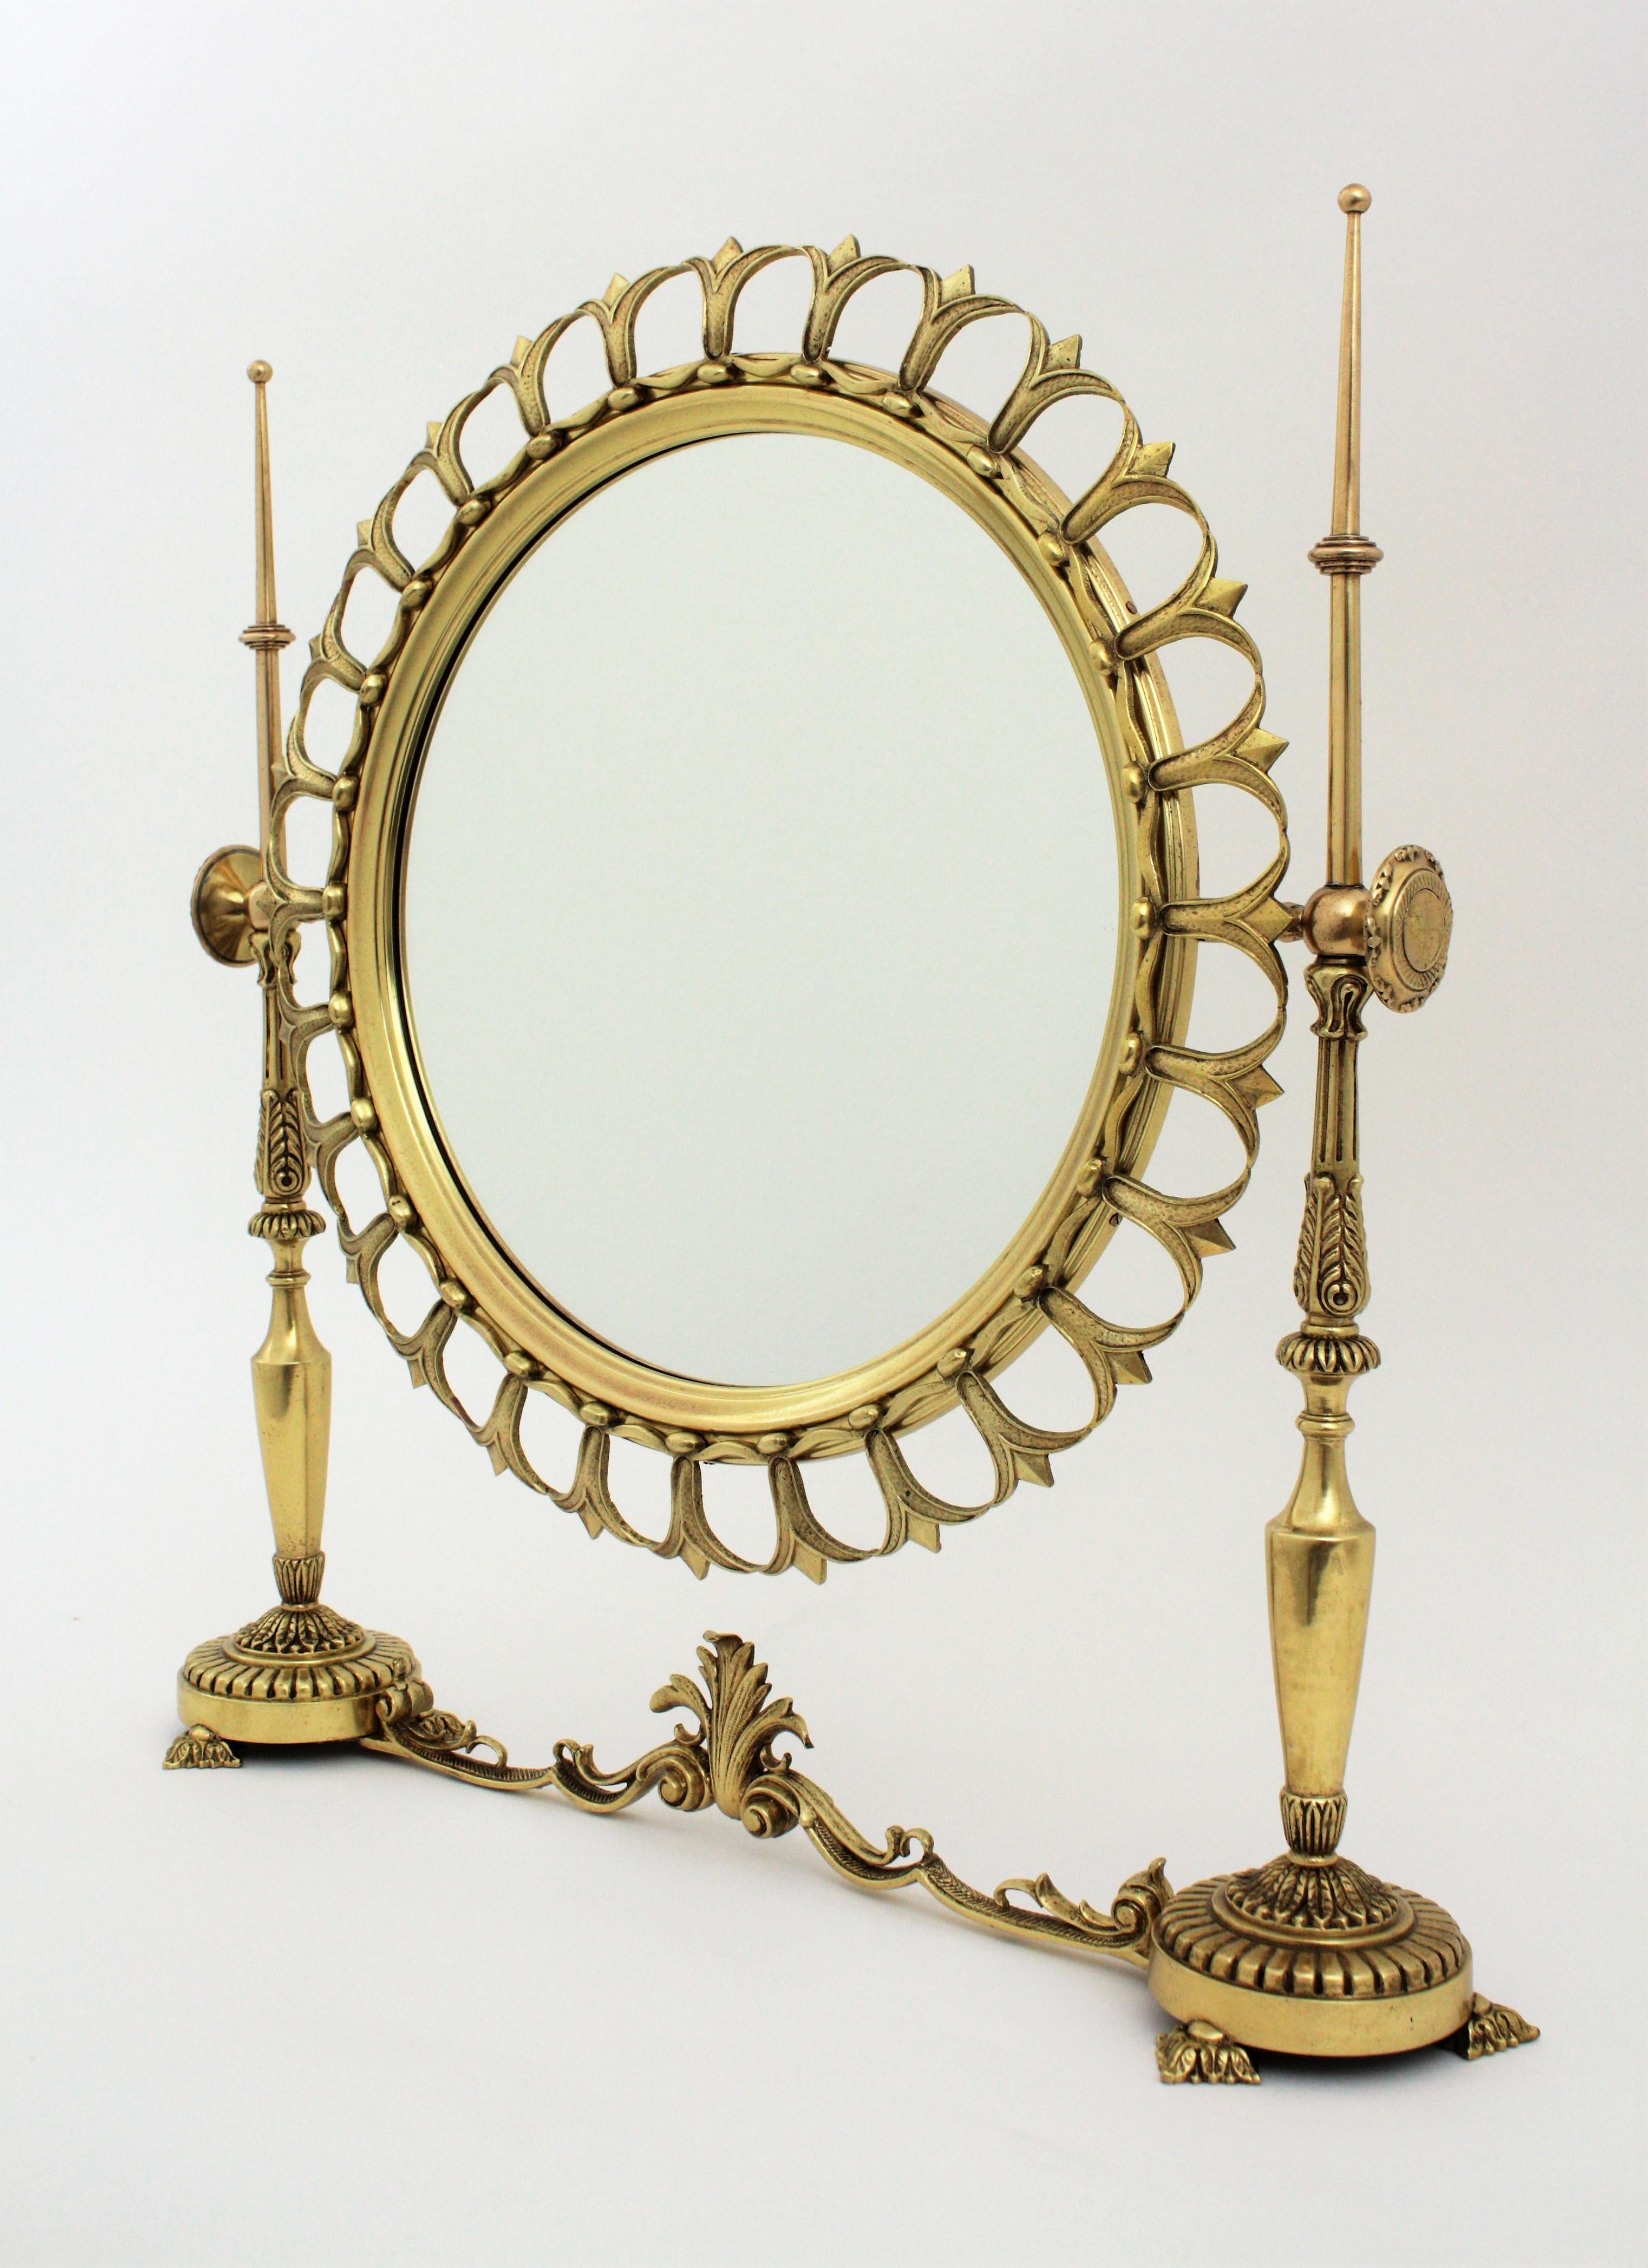 20th Century Neoclassical Sunburst Vanity or Table Mirror in Brass For Sale